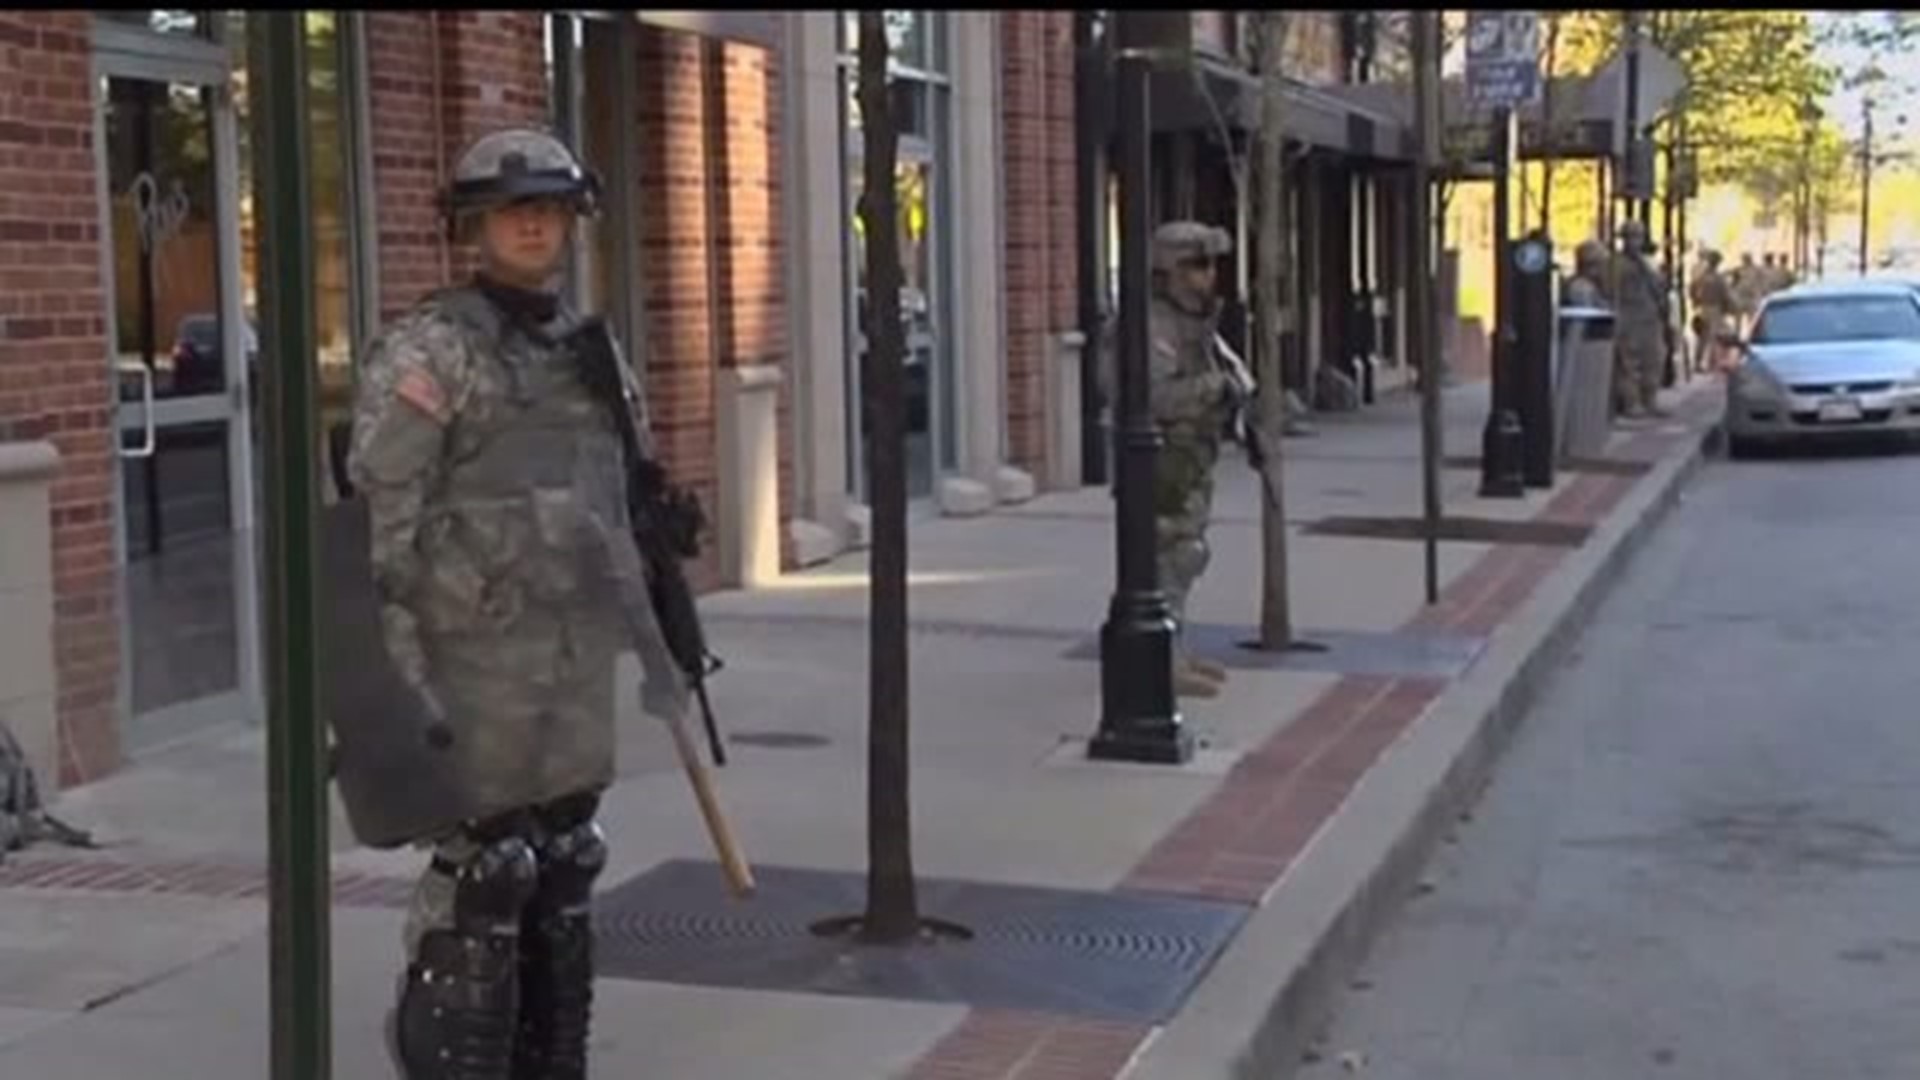 Protests proving more peaceful in Baltimore